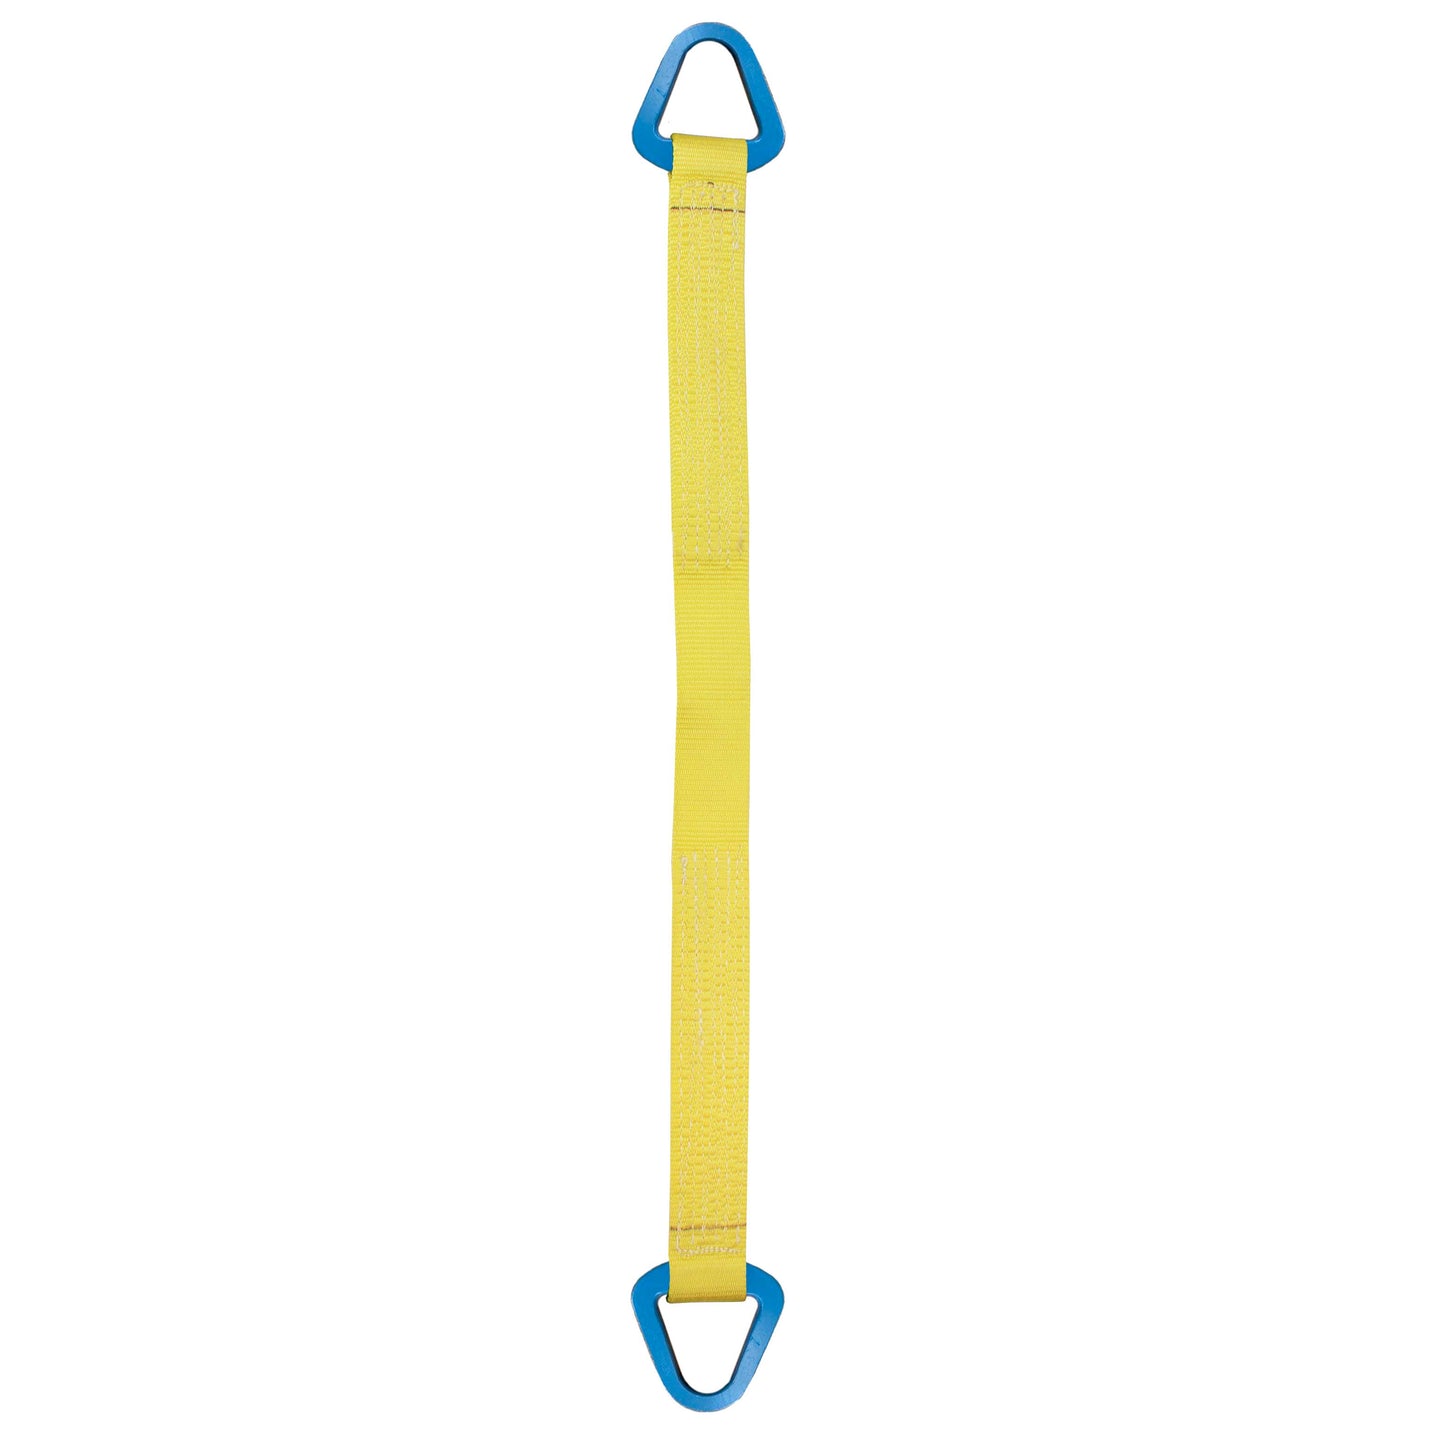 Nylon Lifting Sling Triangle 4 inch x 3 foot 2ply image 1 of 2